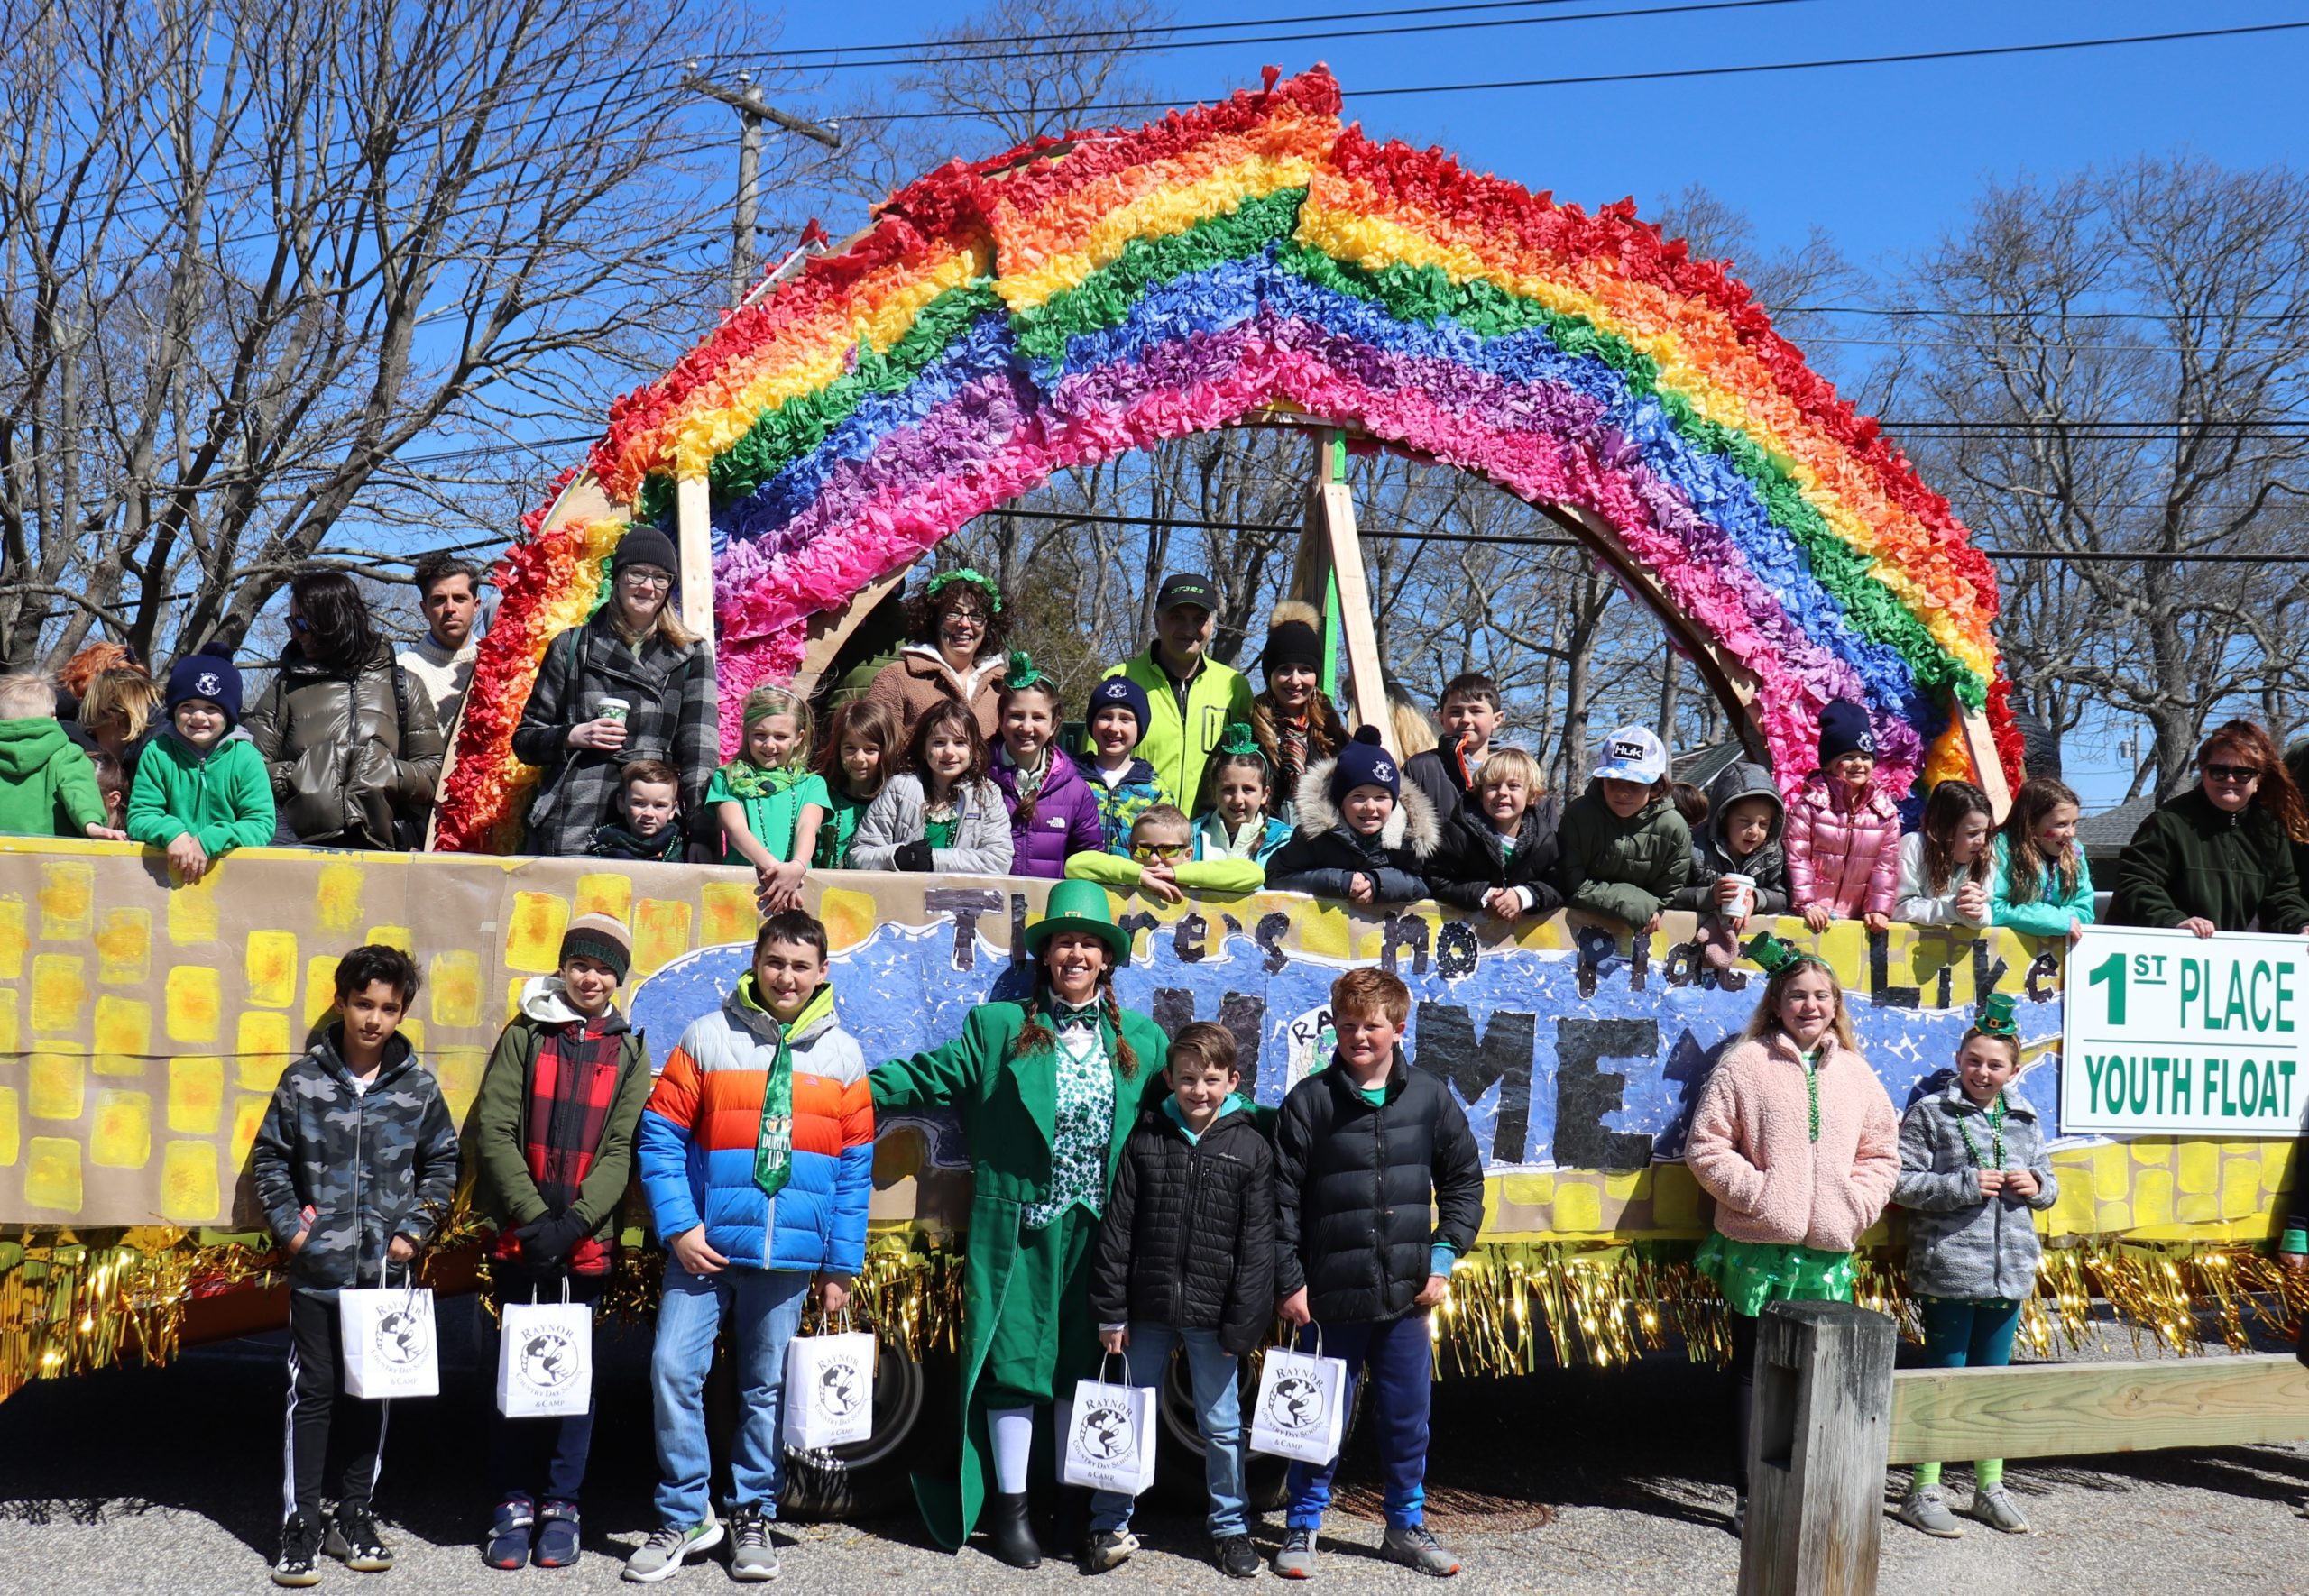 Raynor Country Day School took first place in the Youth Float category at Saturday's annual St. Patrick's Day parade in Westhampton Beach.